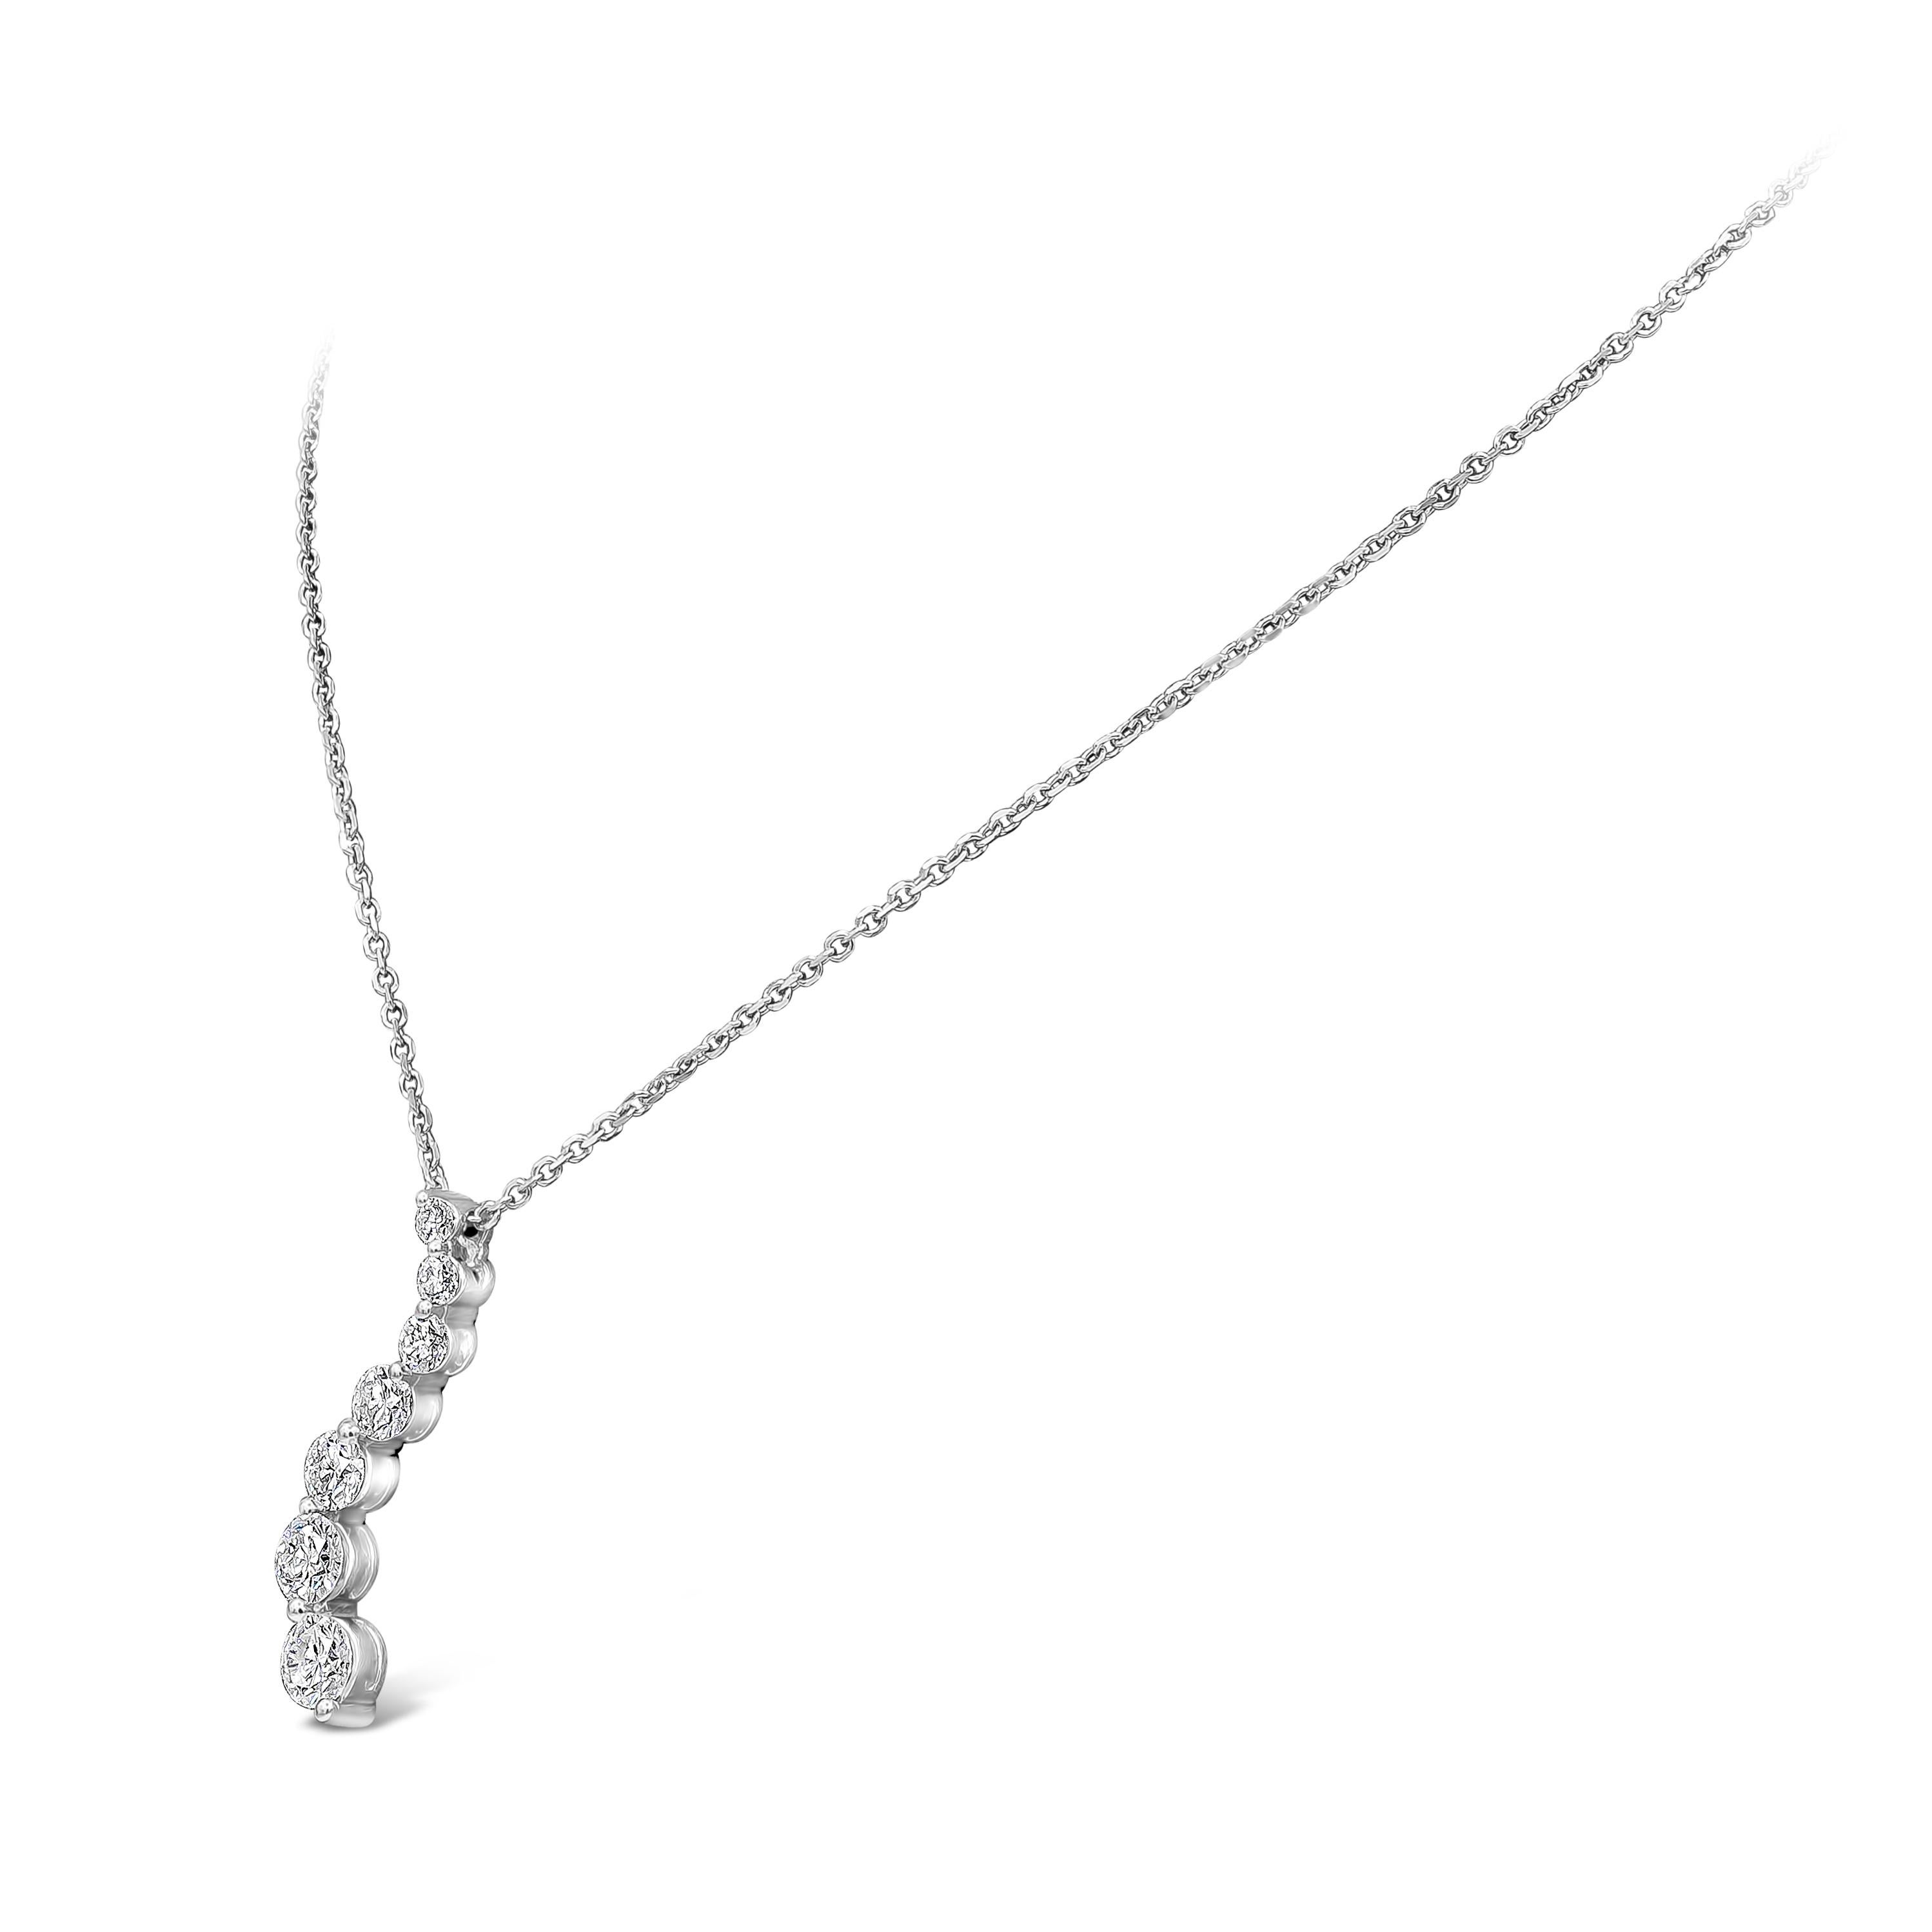 Showcasing a fashionable swirl design encrusted with graduating round brilliant diamonds weighing 2.11 carats total. Made in 18k white gold. Suspended on an adjustable 16 inch white gold chain.
Length of pendant = 1.23 inches

Style available in